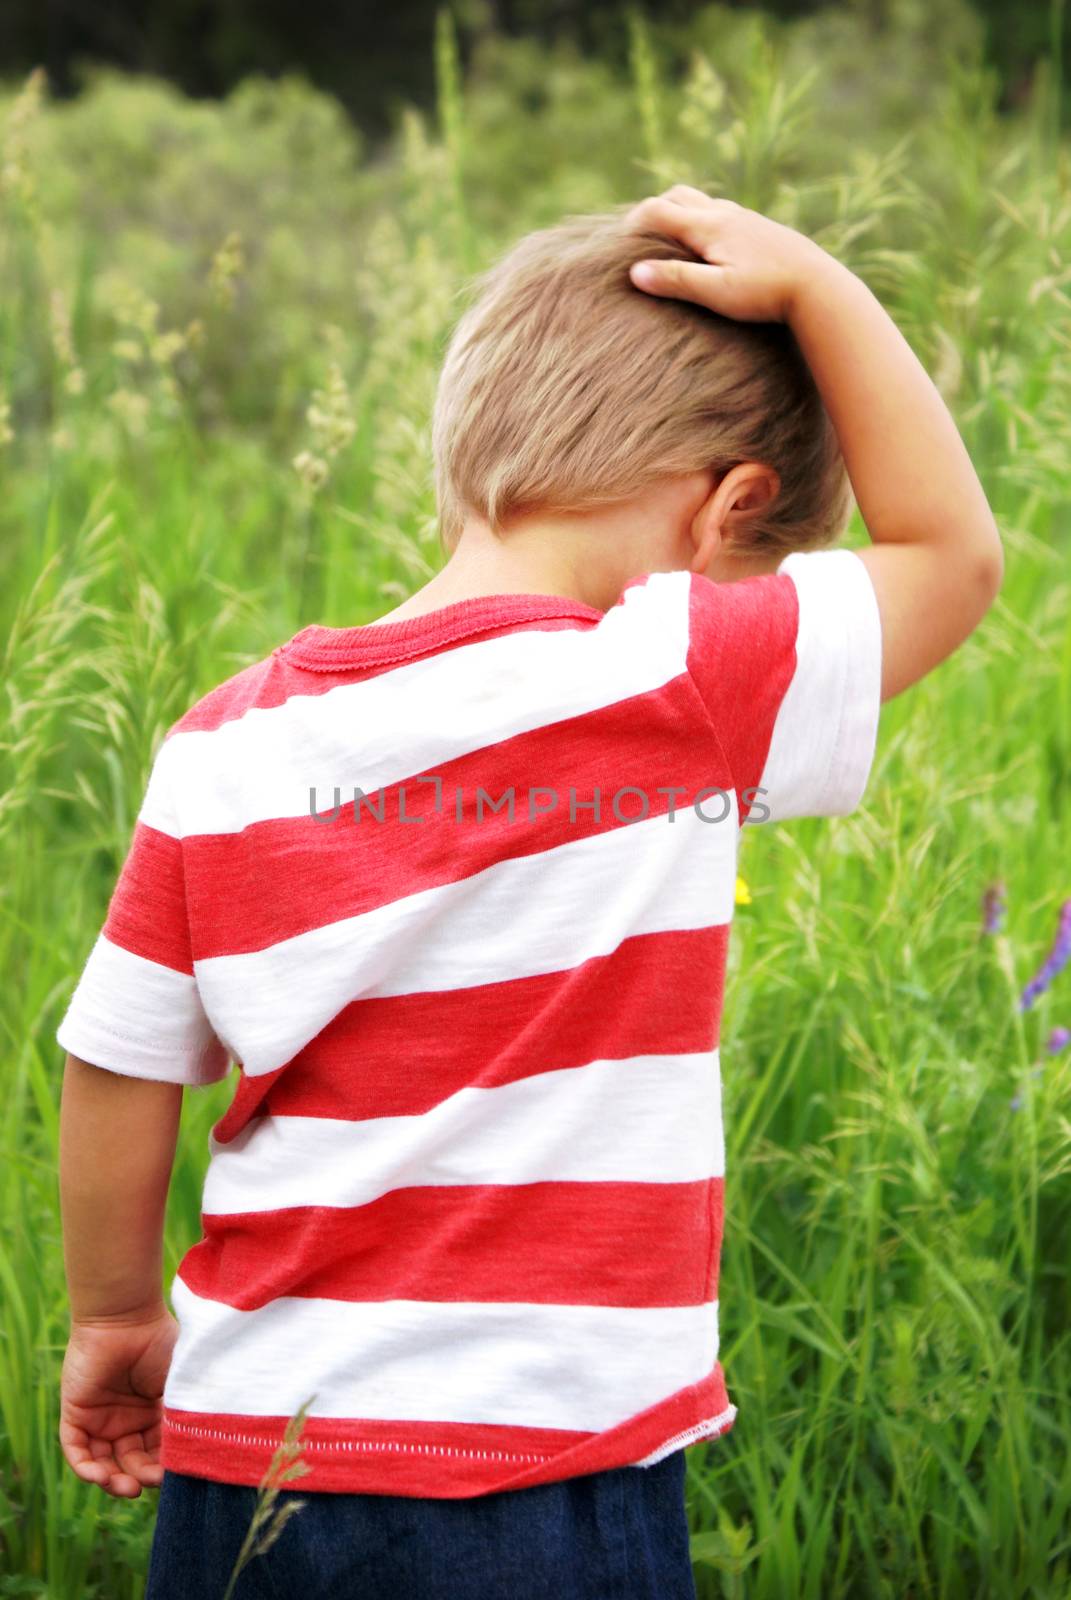 A young boy explores the great outdoors while creating some thoughts in this candid image of him scratching his head during his boyhood sense of wonder.